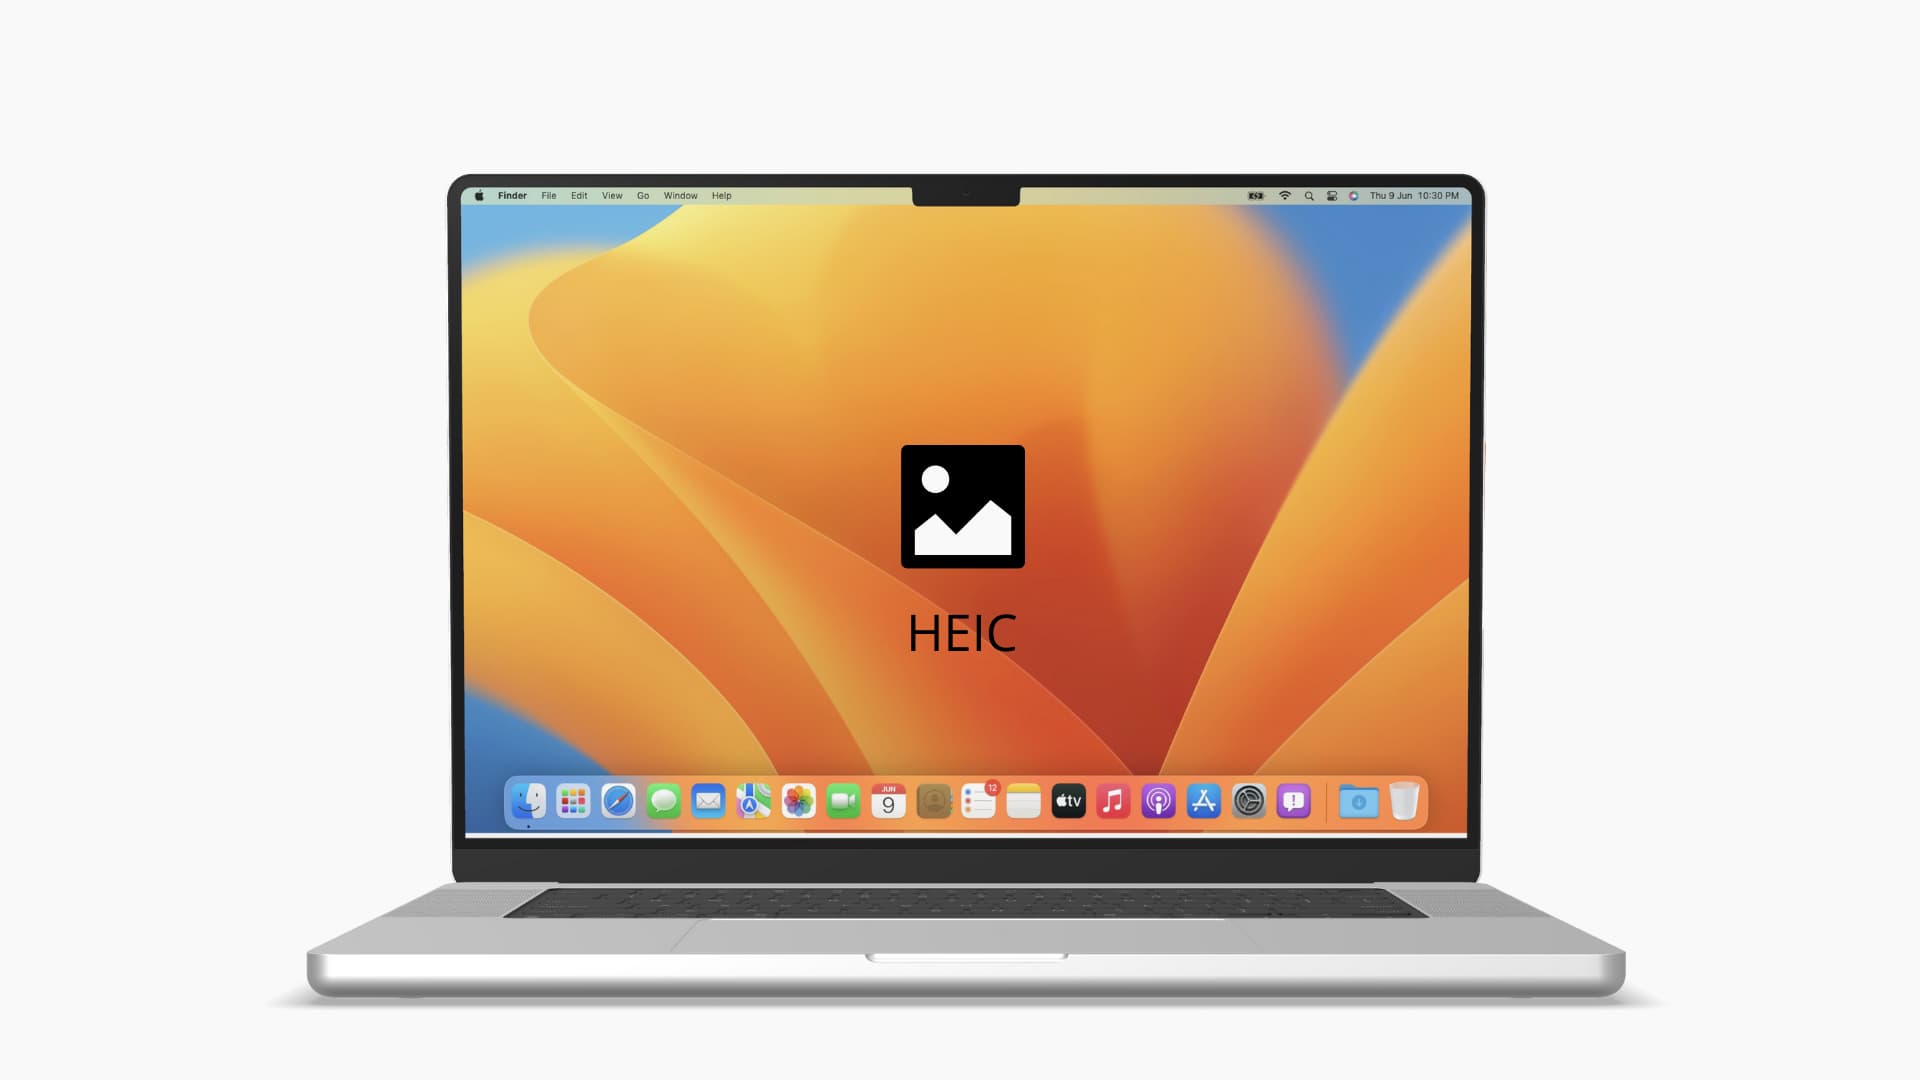 Easy steps to open HEIC images on Mac